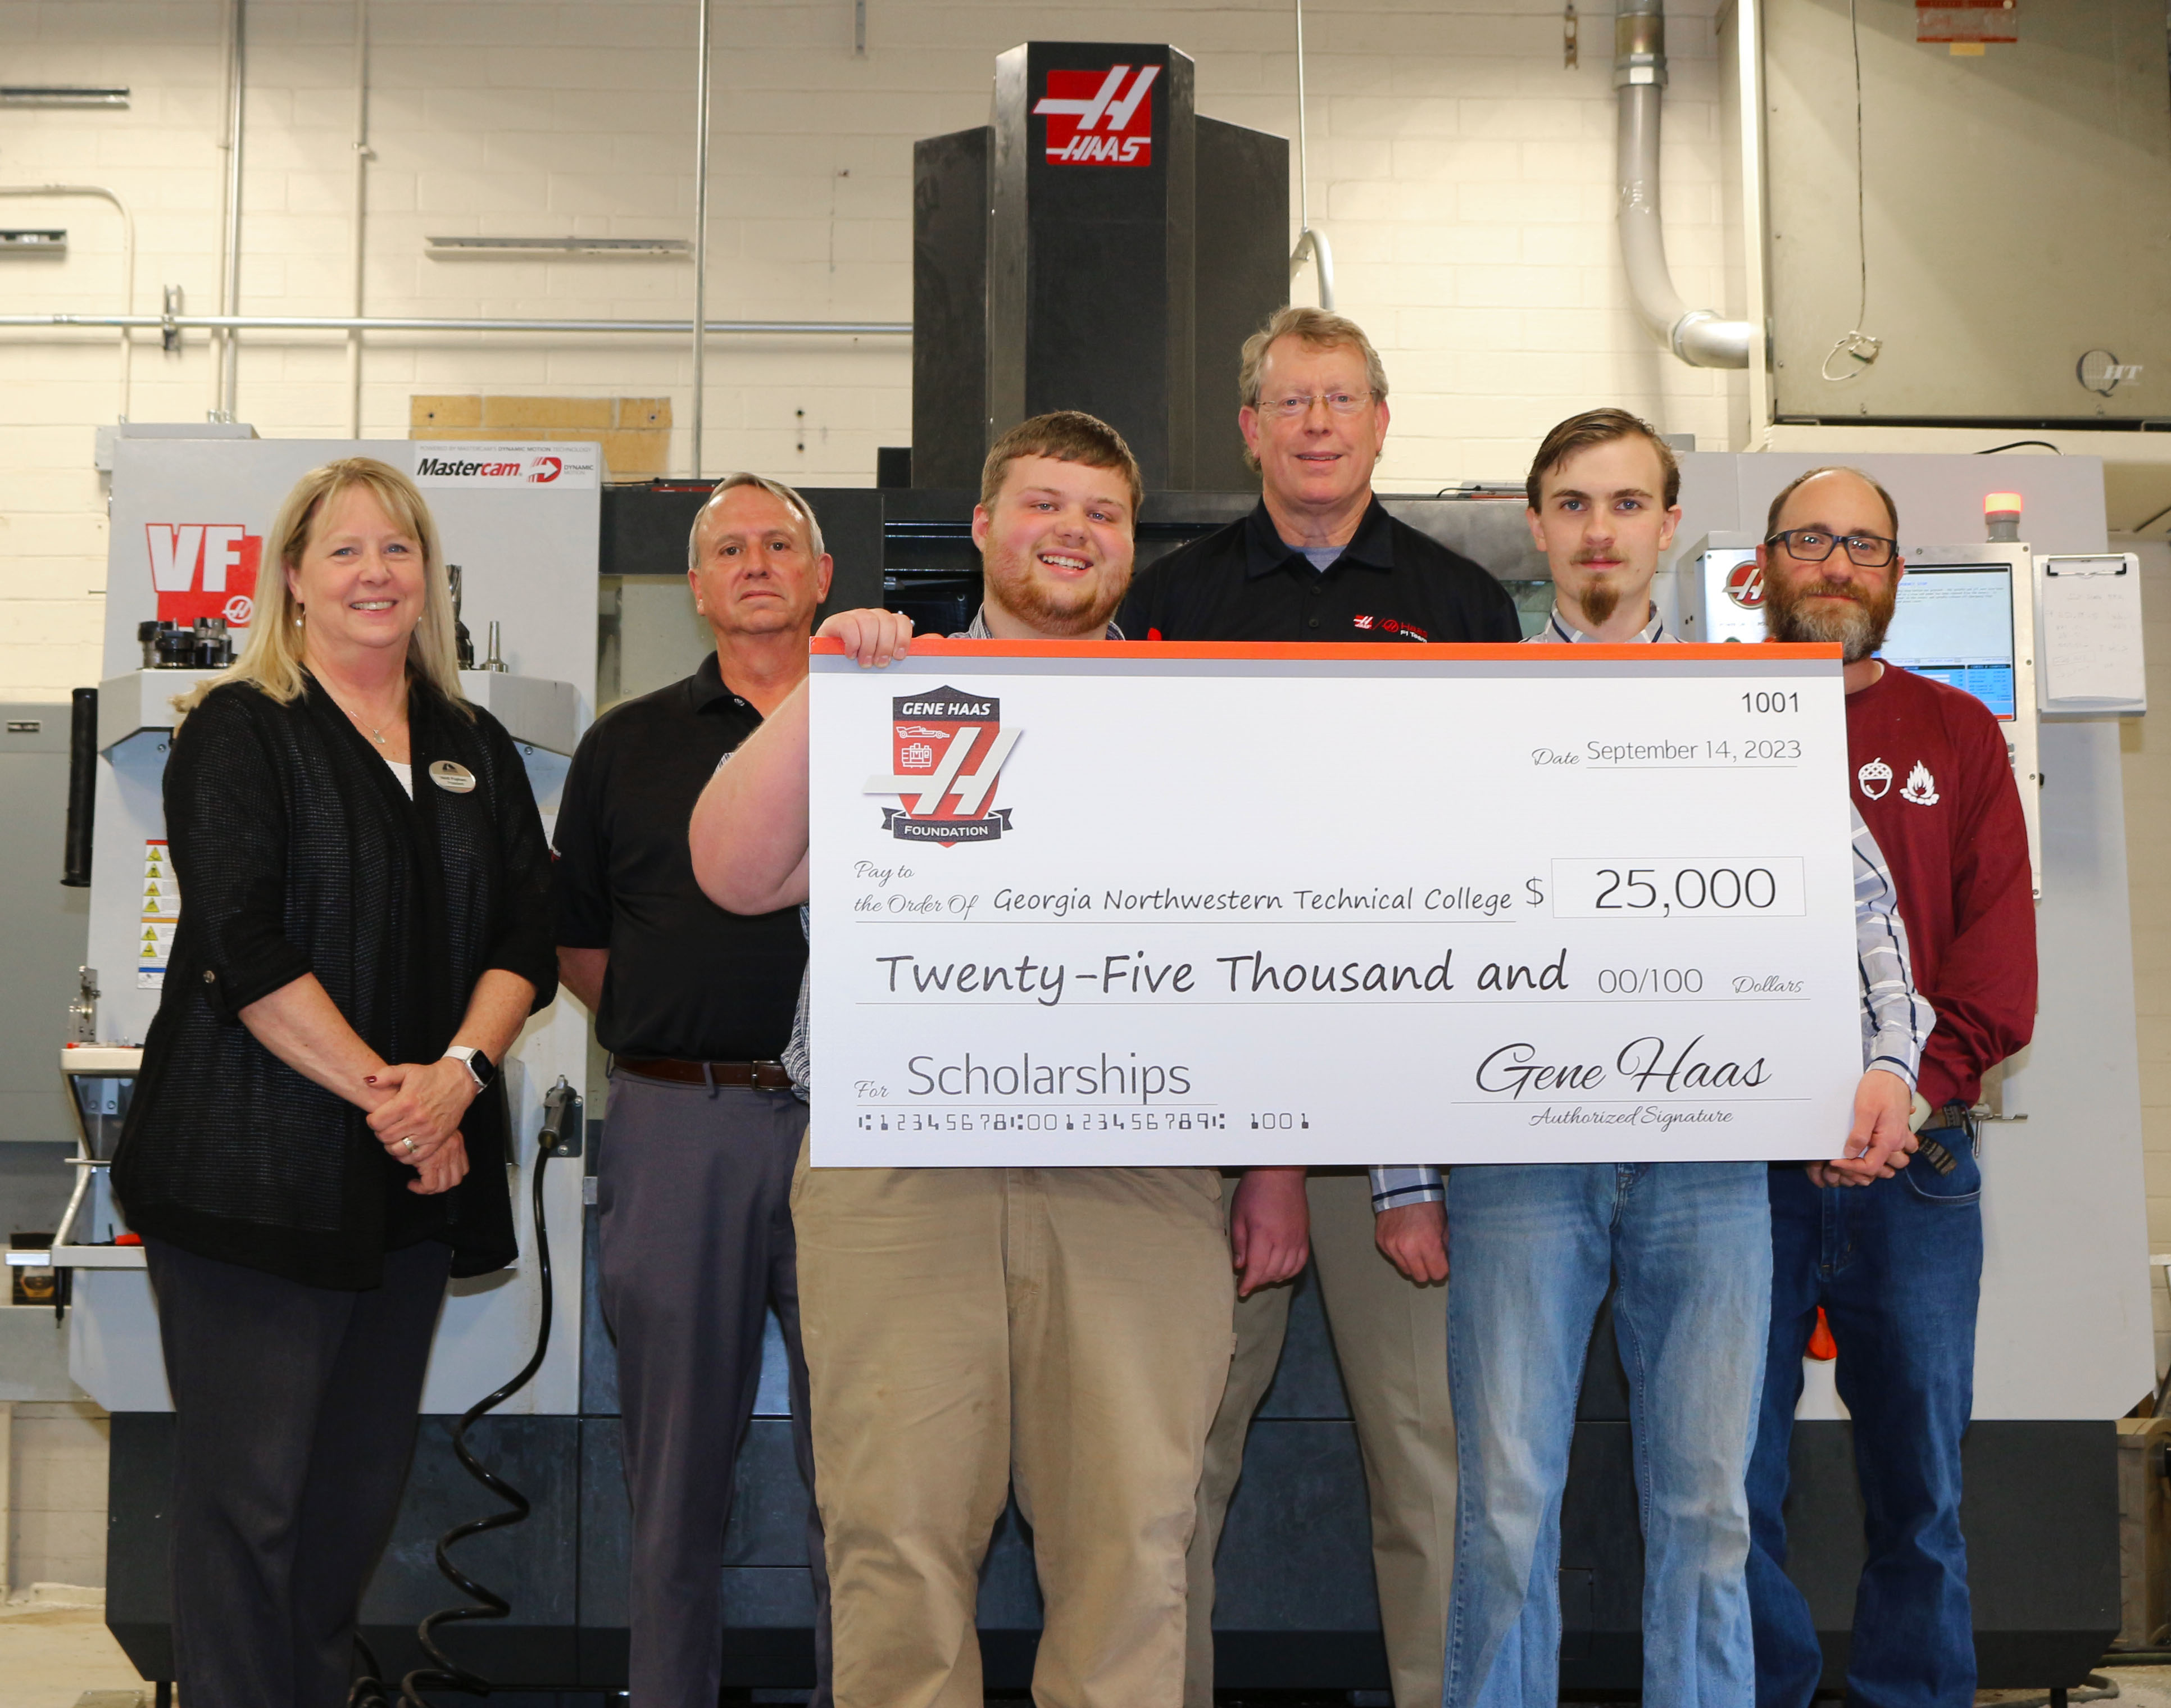 The Gene Haas Foundation presents a grant of $25,000 to GNTC on Thursday, Oct. 19. (From left) Dr. Heidi Popham, president of GNTC; David Aycock, sales engineer for Phillips Corporation/Haas Factory Outlet; GNTC student Jason Ward; Philip Shirley, Precision Machining and Manufacturing instructor; GNTC student Jeshua Freeman; and Bart Jenkins, director of Precision Machining and Manufacturing at GNTC, stand in front of a Haas VF2 Computer Numerical Control milling machine at the Floyd County Campus in Rome. Freeman and Ward received scholarships this semester that are funded through the Gene Haas Foundation grant.